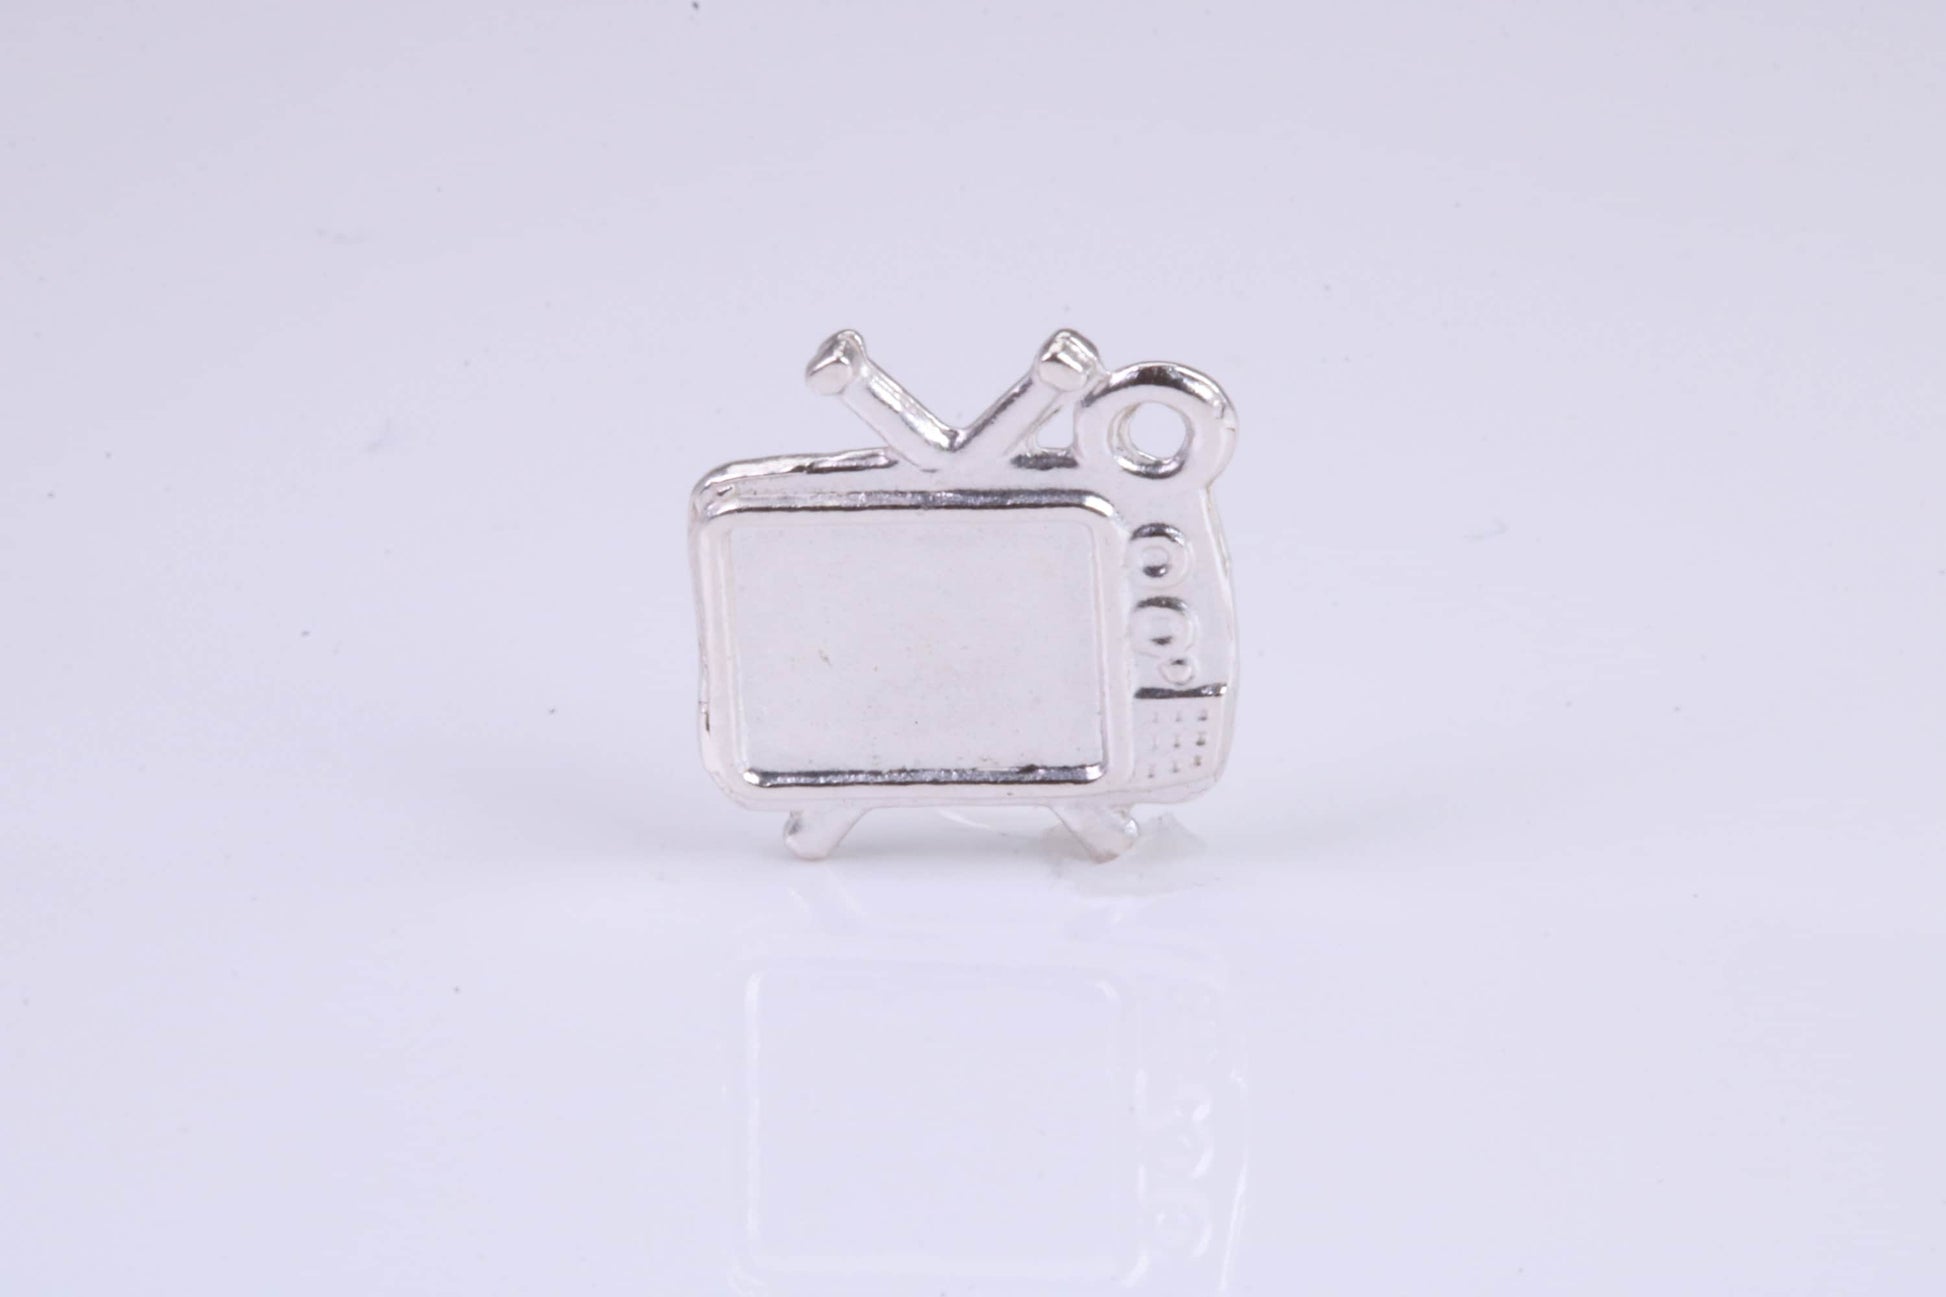 Vintage Television Charm, Traditional Charm, Made from Solid 925 Grade Sterling Silver, Complete with Attachment Link